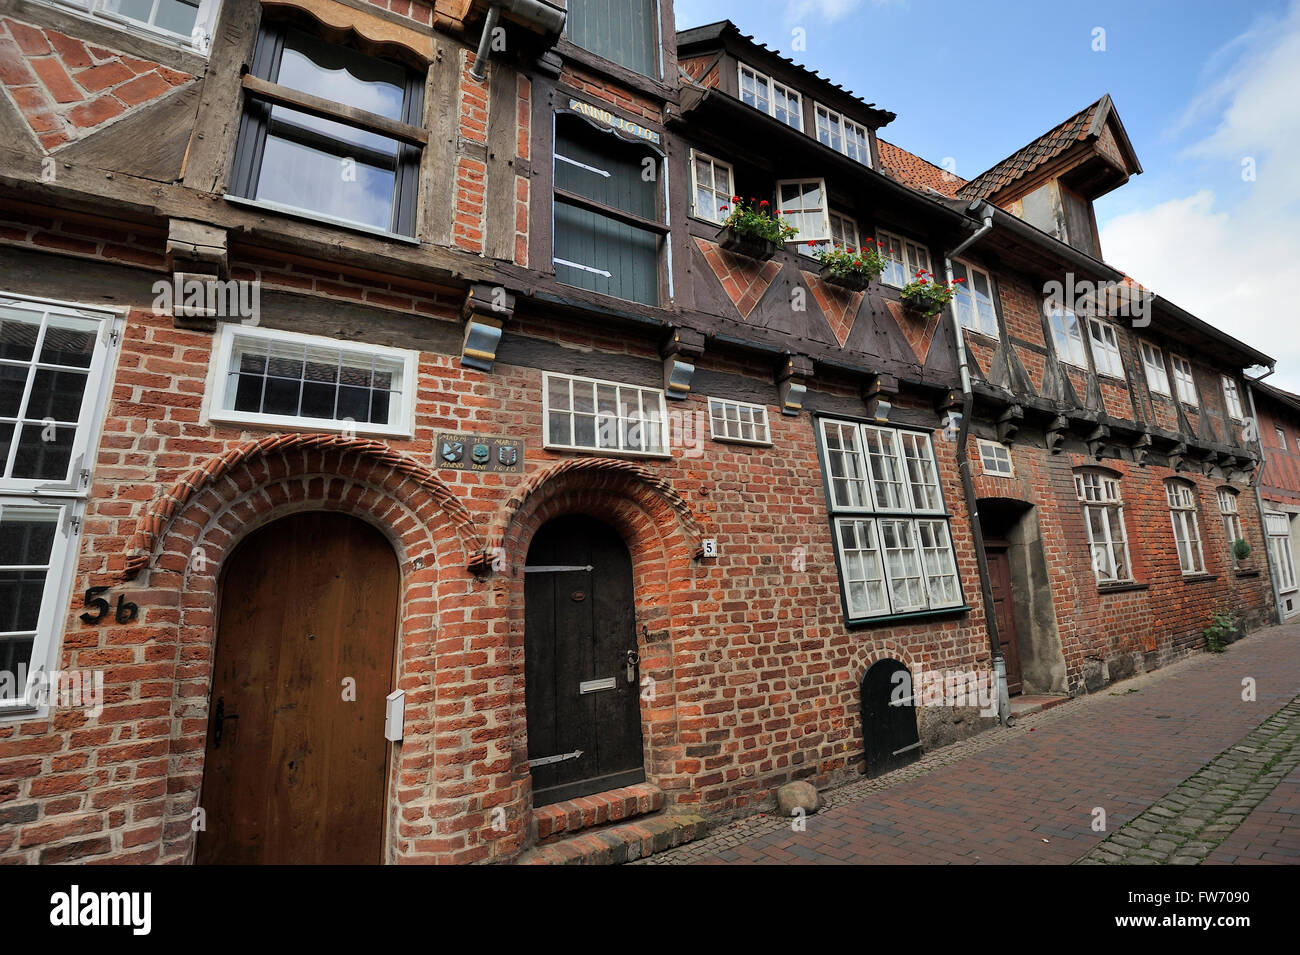 old half-timbered house, Hanseatic Town Luneburg, Germany Stock Photo